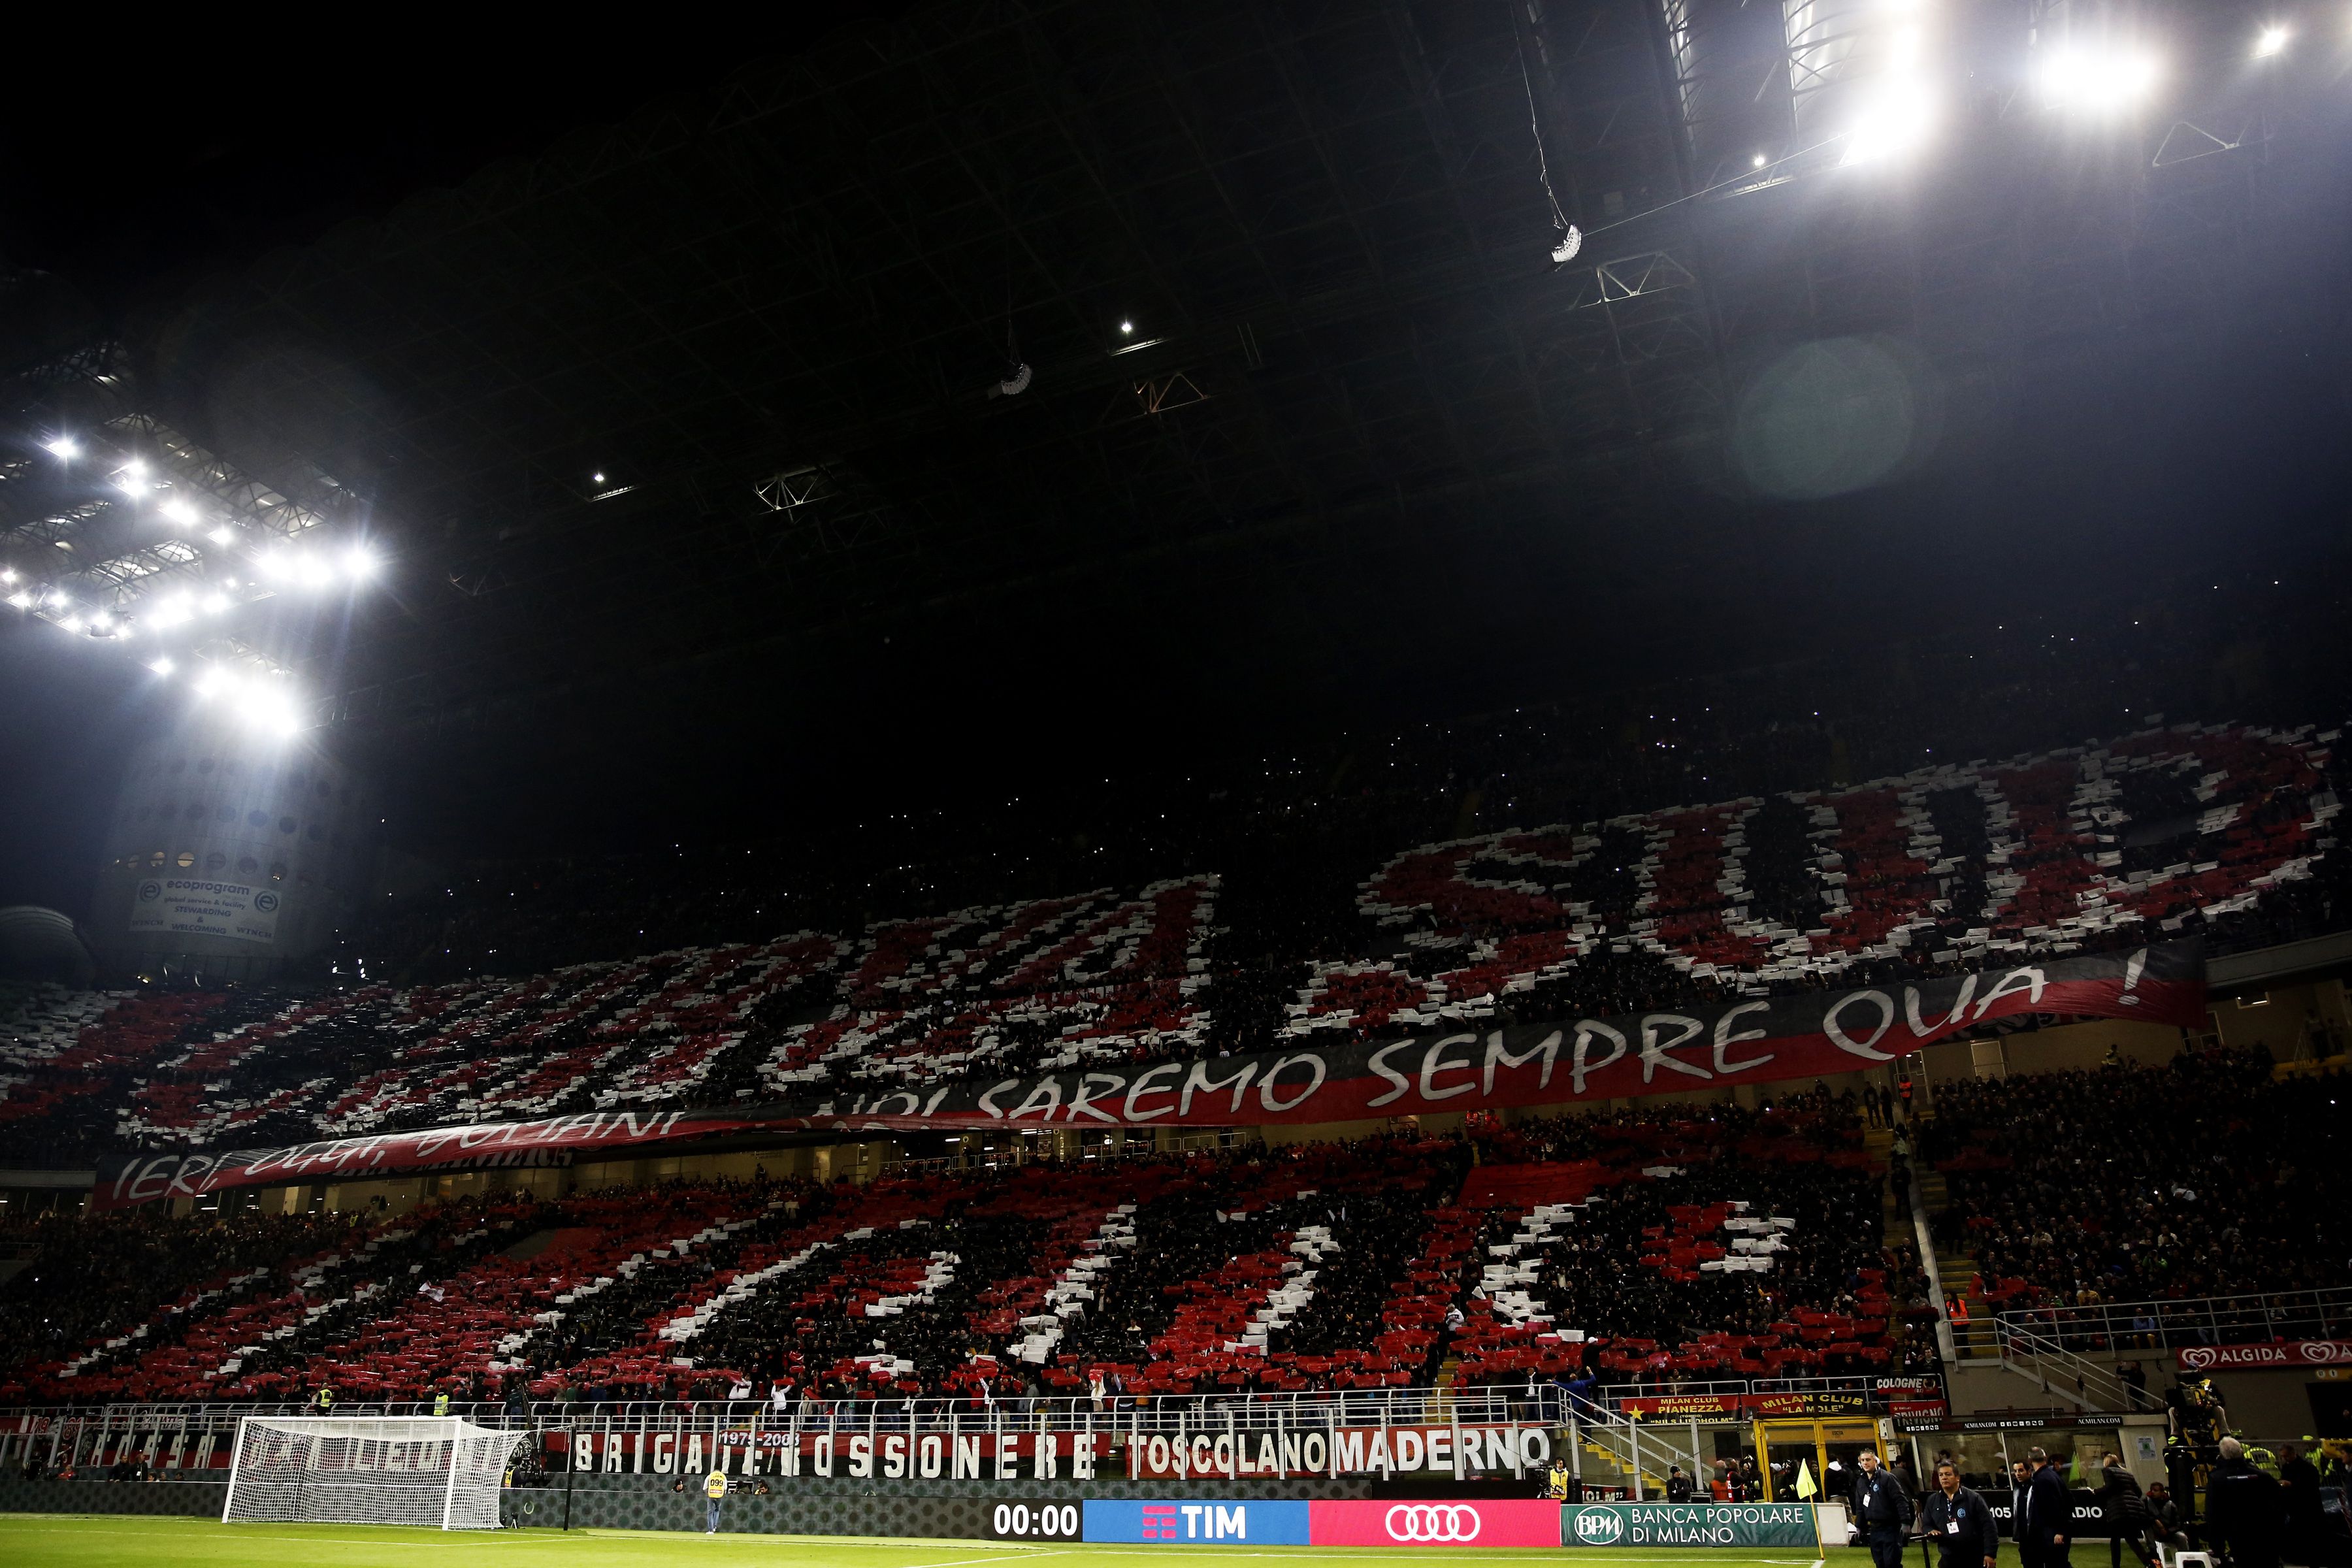 Milan's supporters cheer during the Italian Serie A football match AC Milan versus Juventus on October 22, 2016 at the San Siro Stadium in Milan.  / AFP / MARCO BERTORELLO        (Photo credit should read MARCO BERTORELLO/AFP/Getty Images)